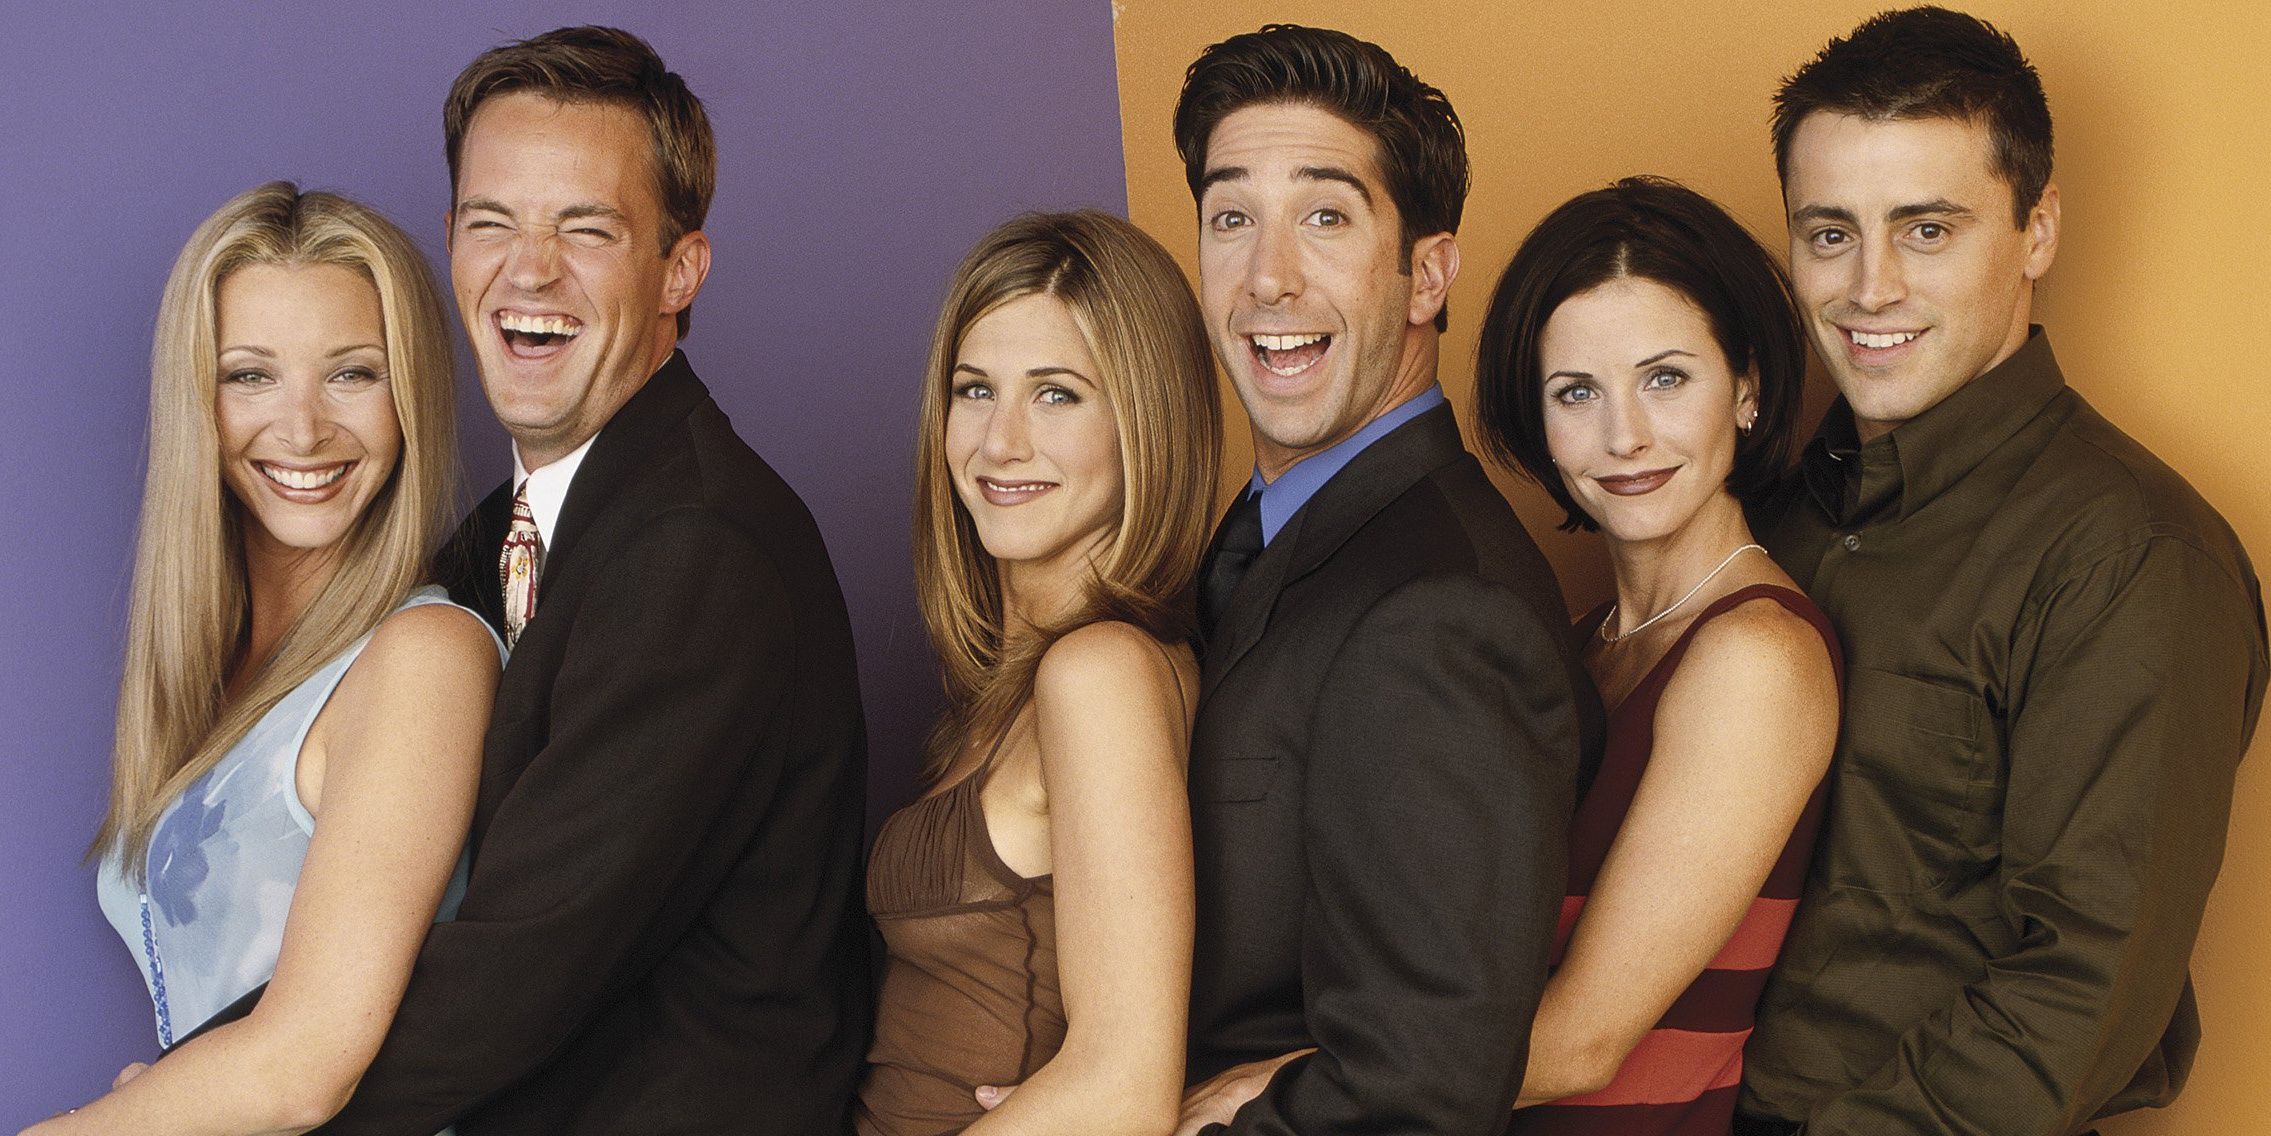 10 Things Friends Did Better Than Seinfeld